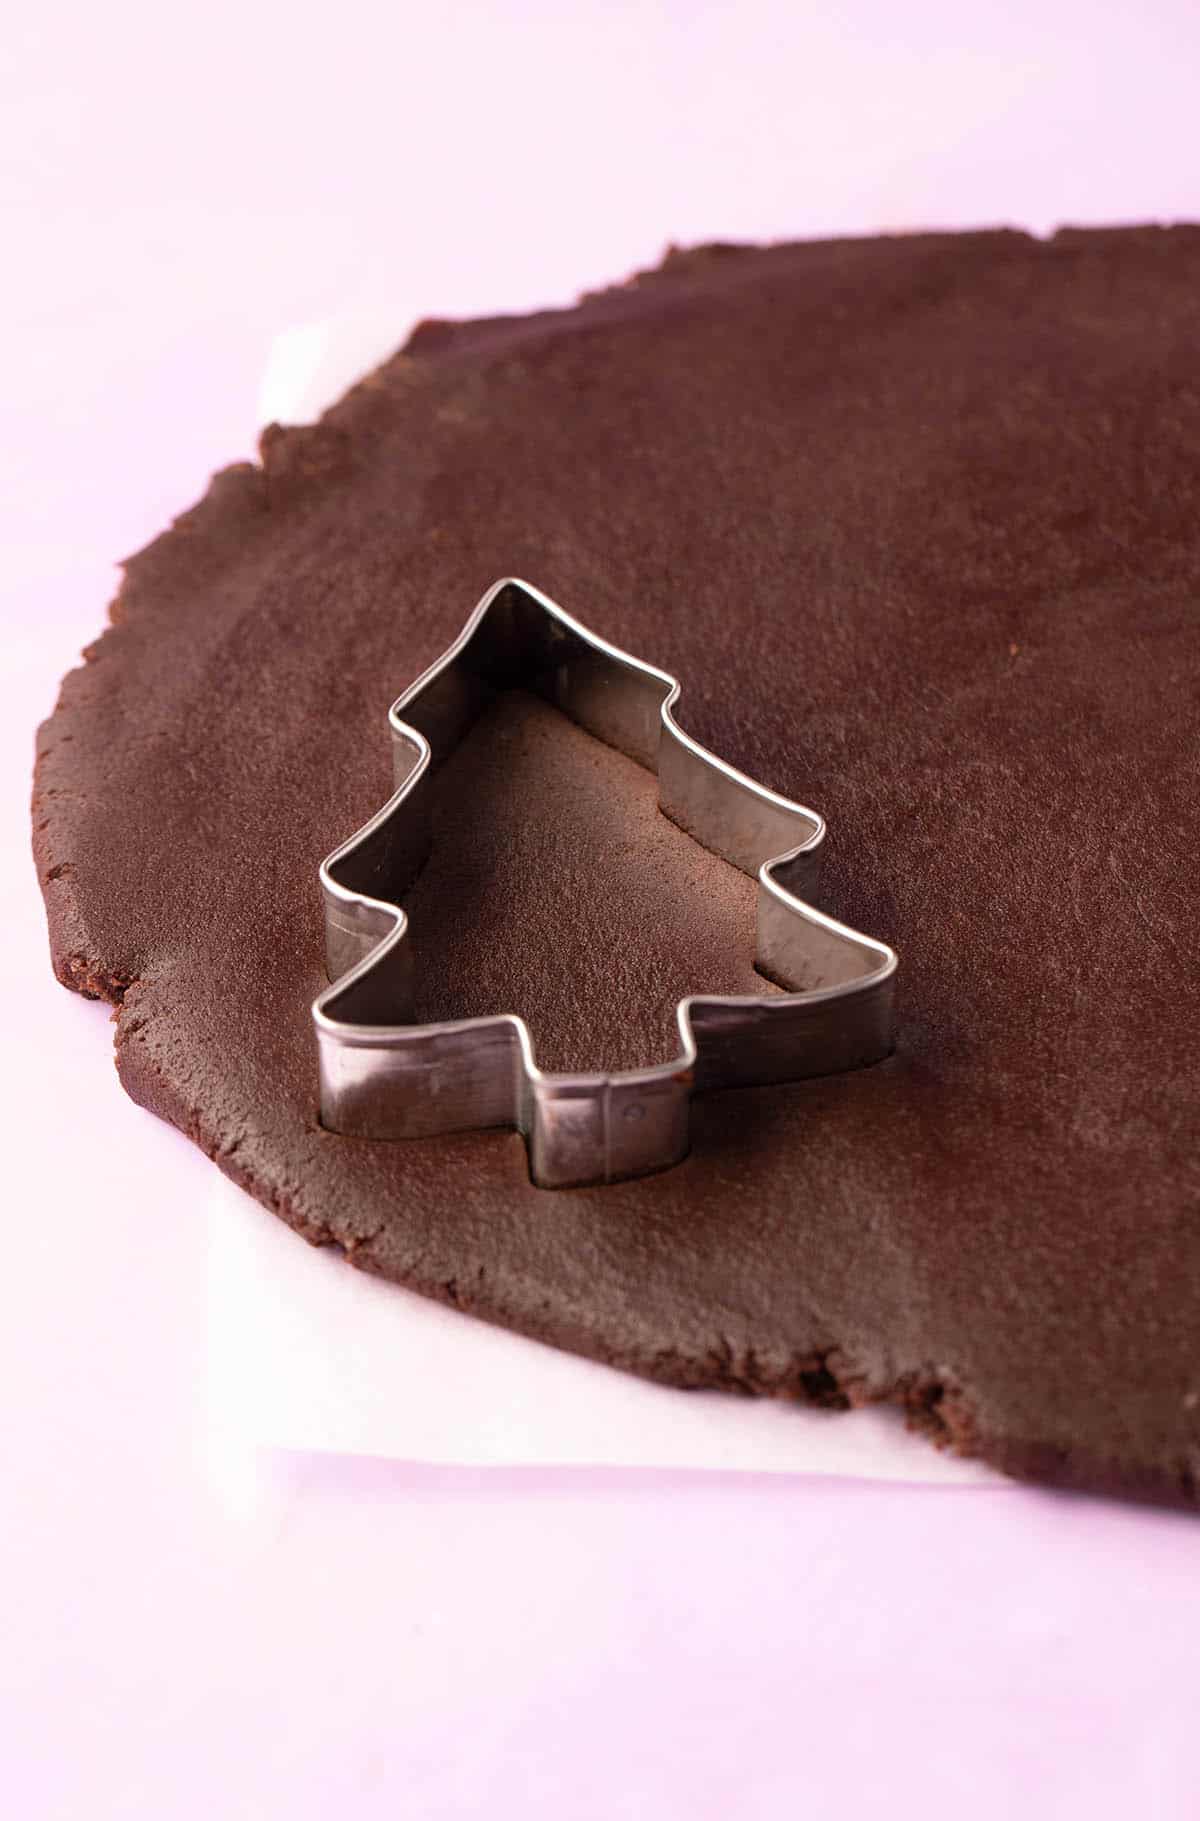 Chocolate cookie dough that’s been rolled with a Christmas tree cookie cutter ready to stamp. 